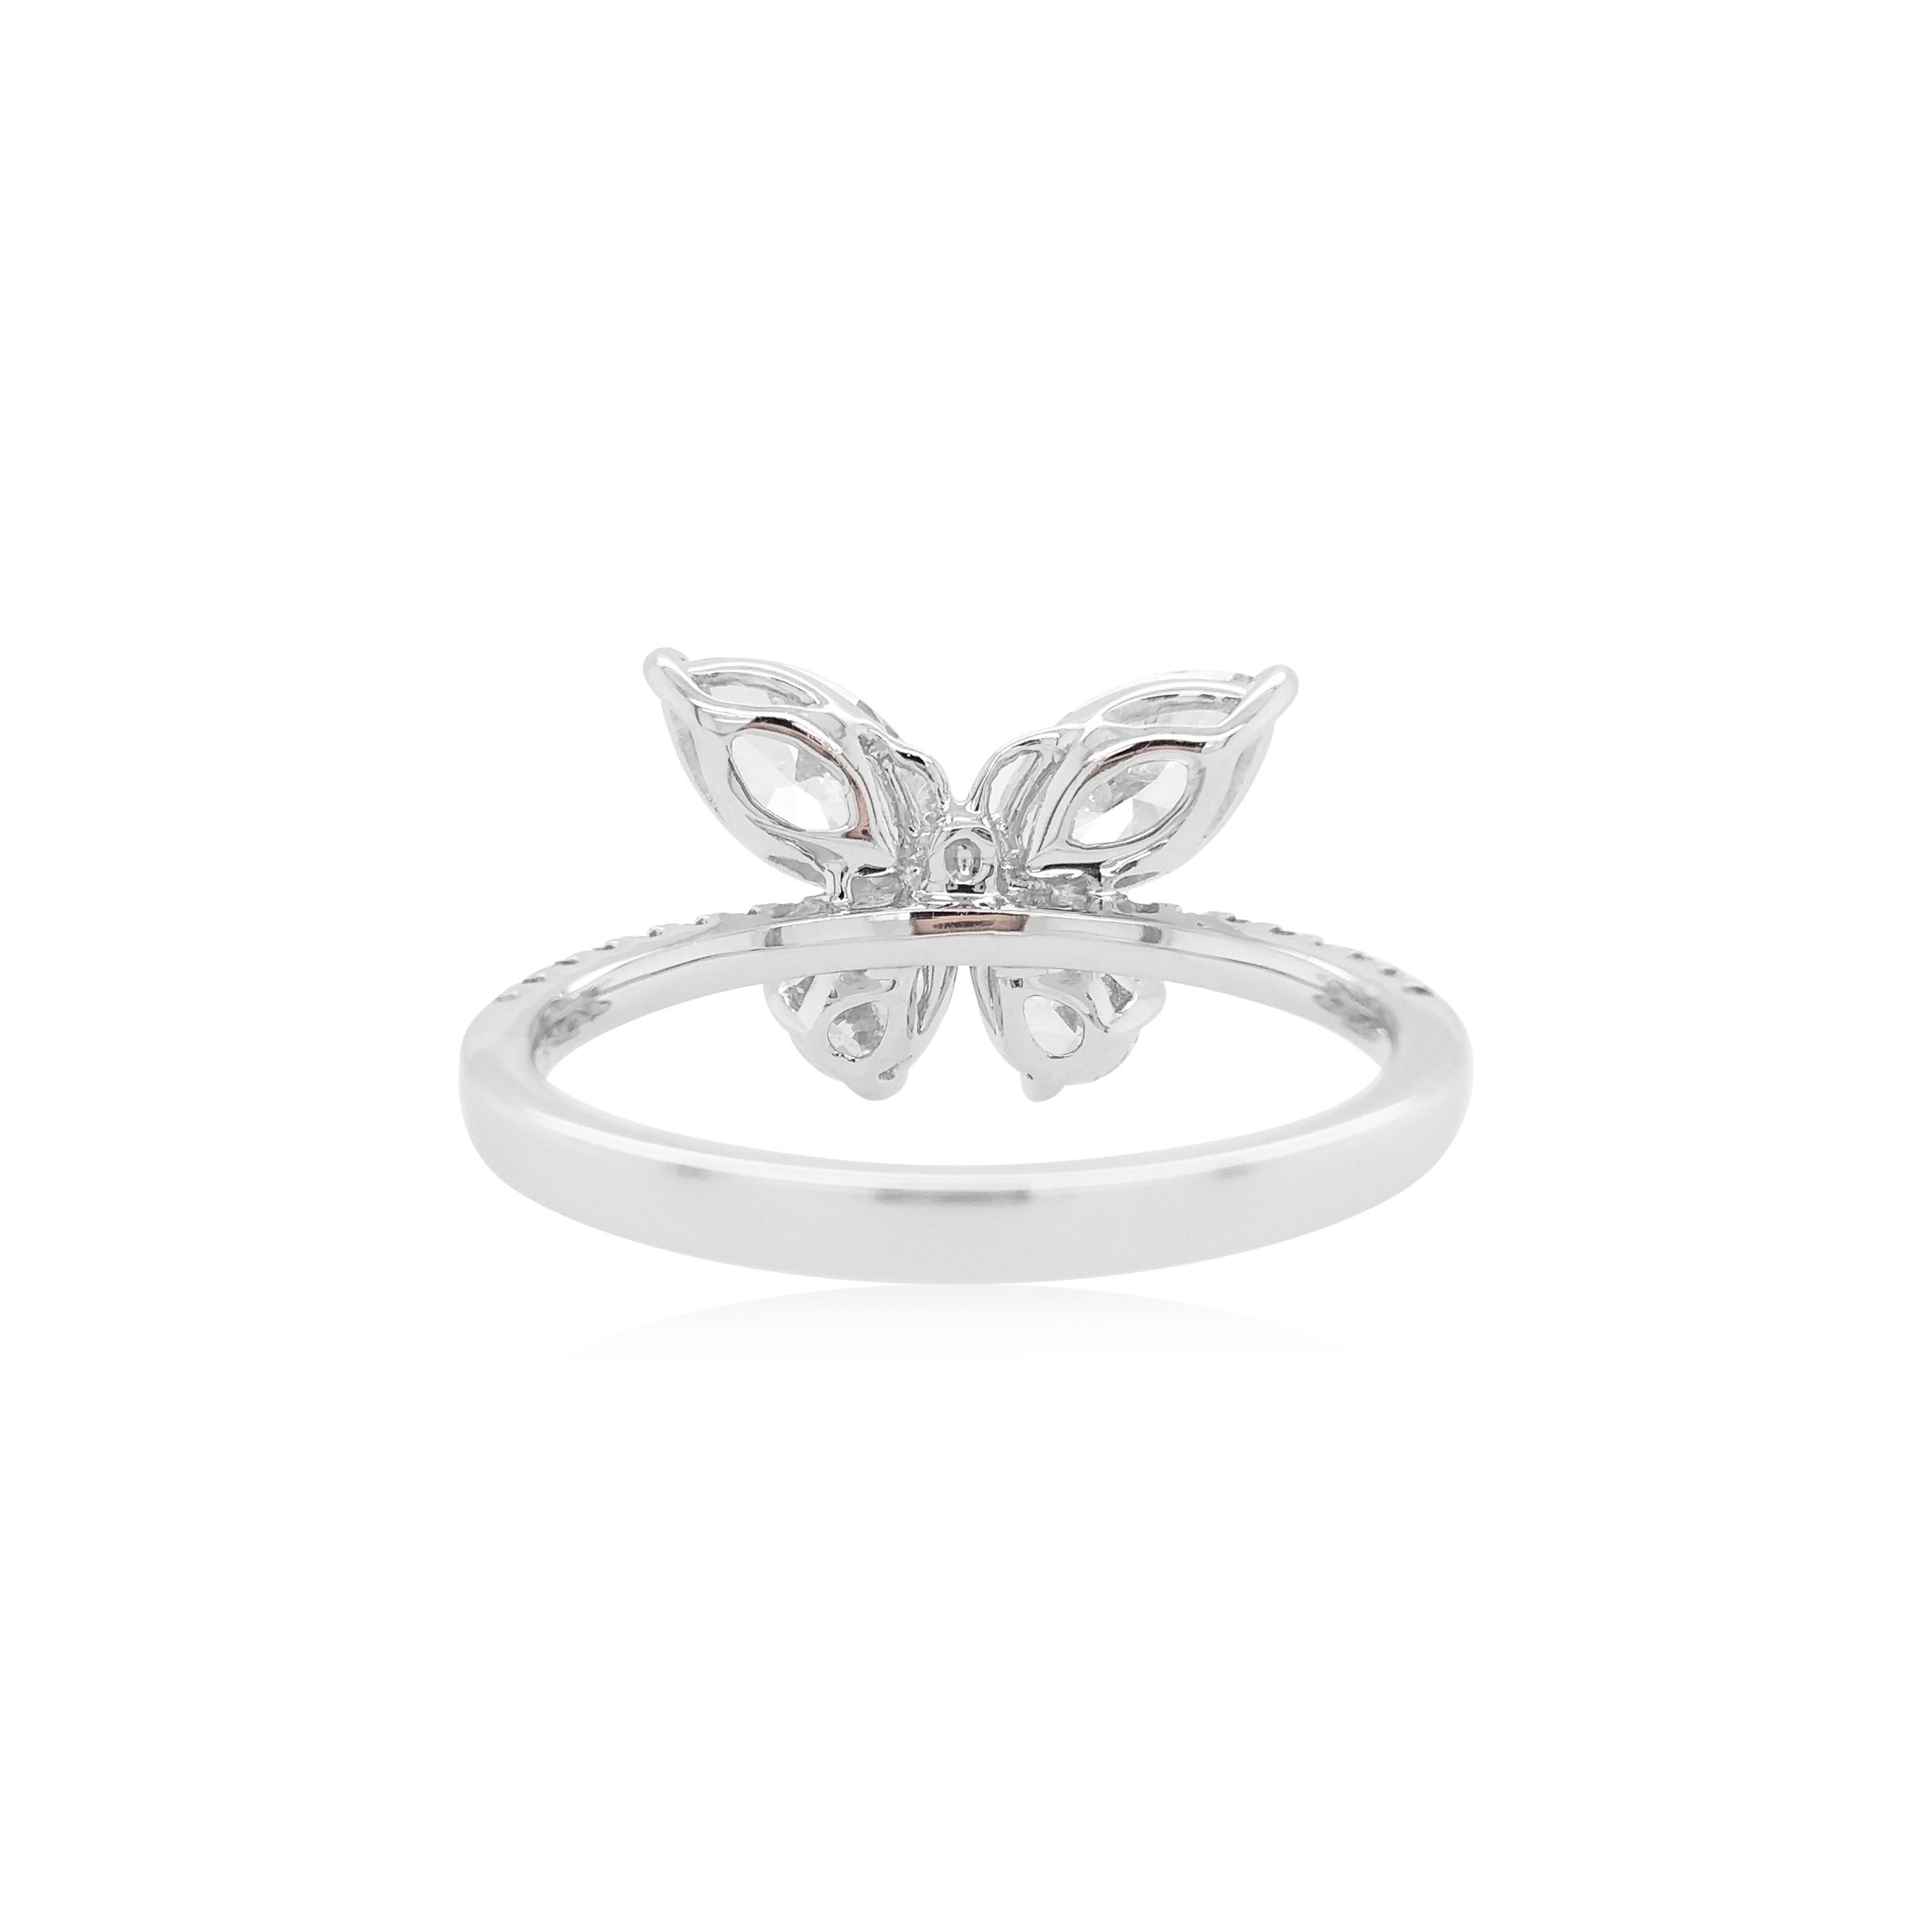 This unique butterfly-motif platinum ring features marquise-shape and pear-shape scintillating white diamonds at the heart of the design. Unique and striking, this exceptional ring will add a touch of high glamour to any look.
-	Certified